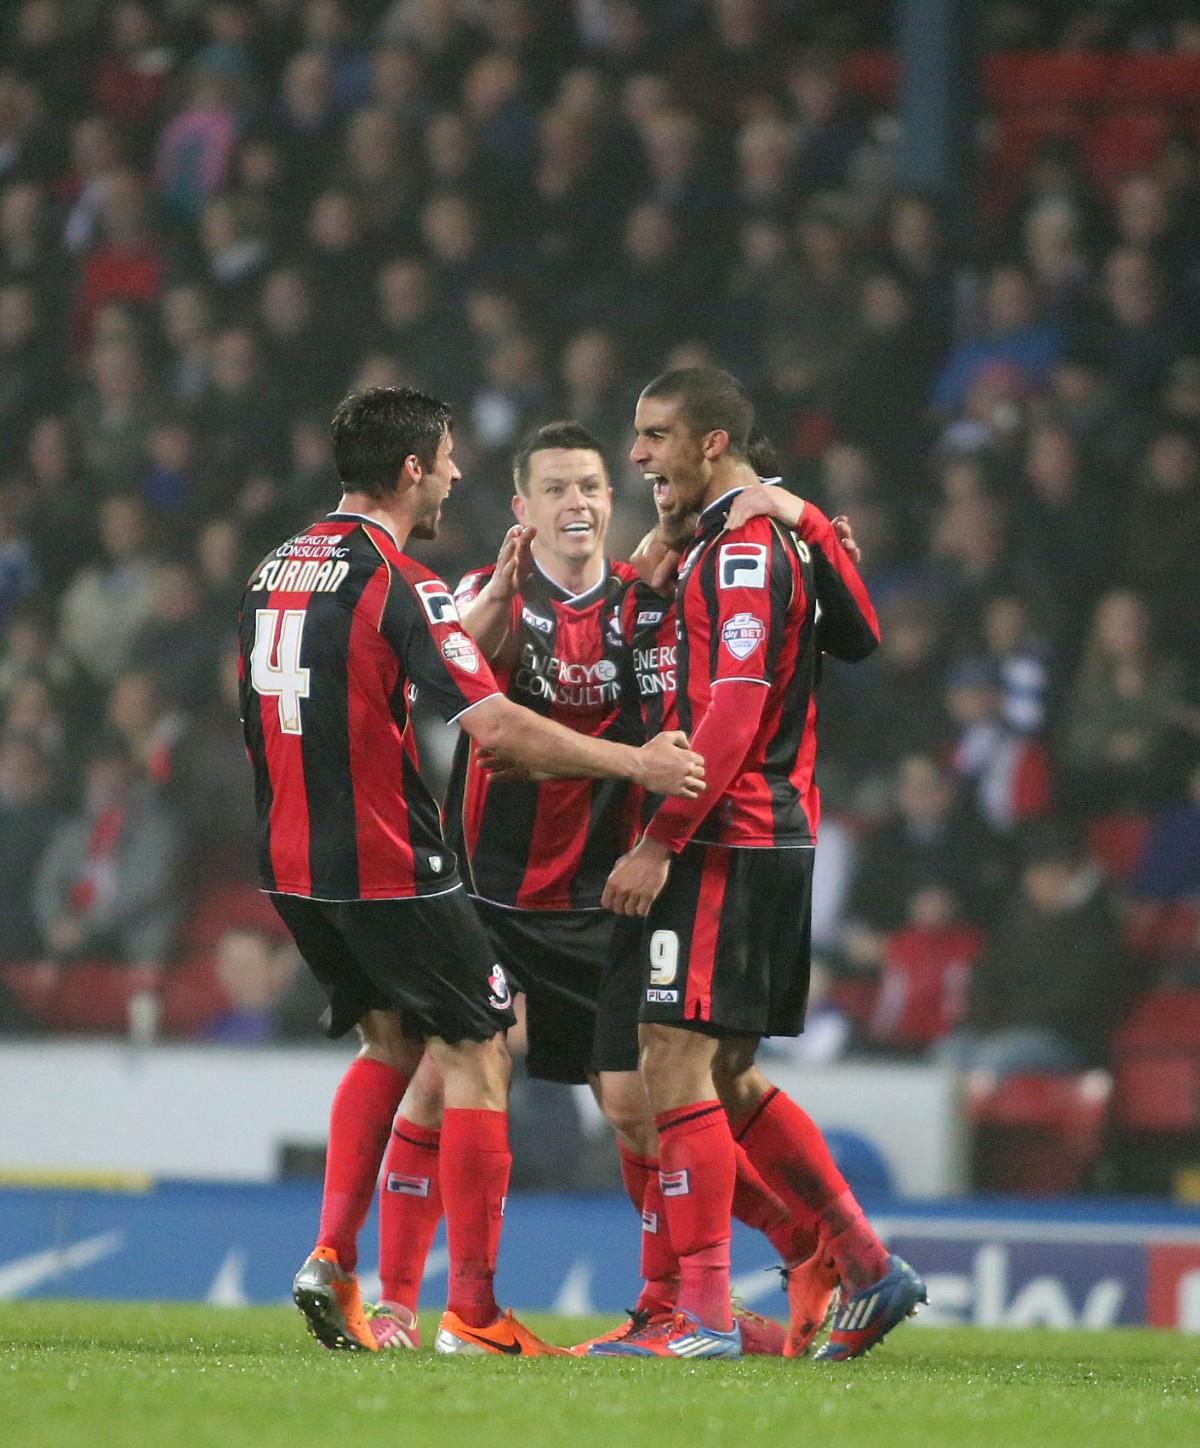 All our pictures from Blackburn Rovers v AFC Bournemouth at Ewood Park on 12th March, 2014.